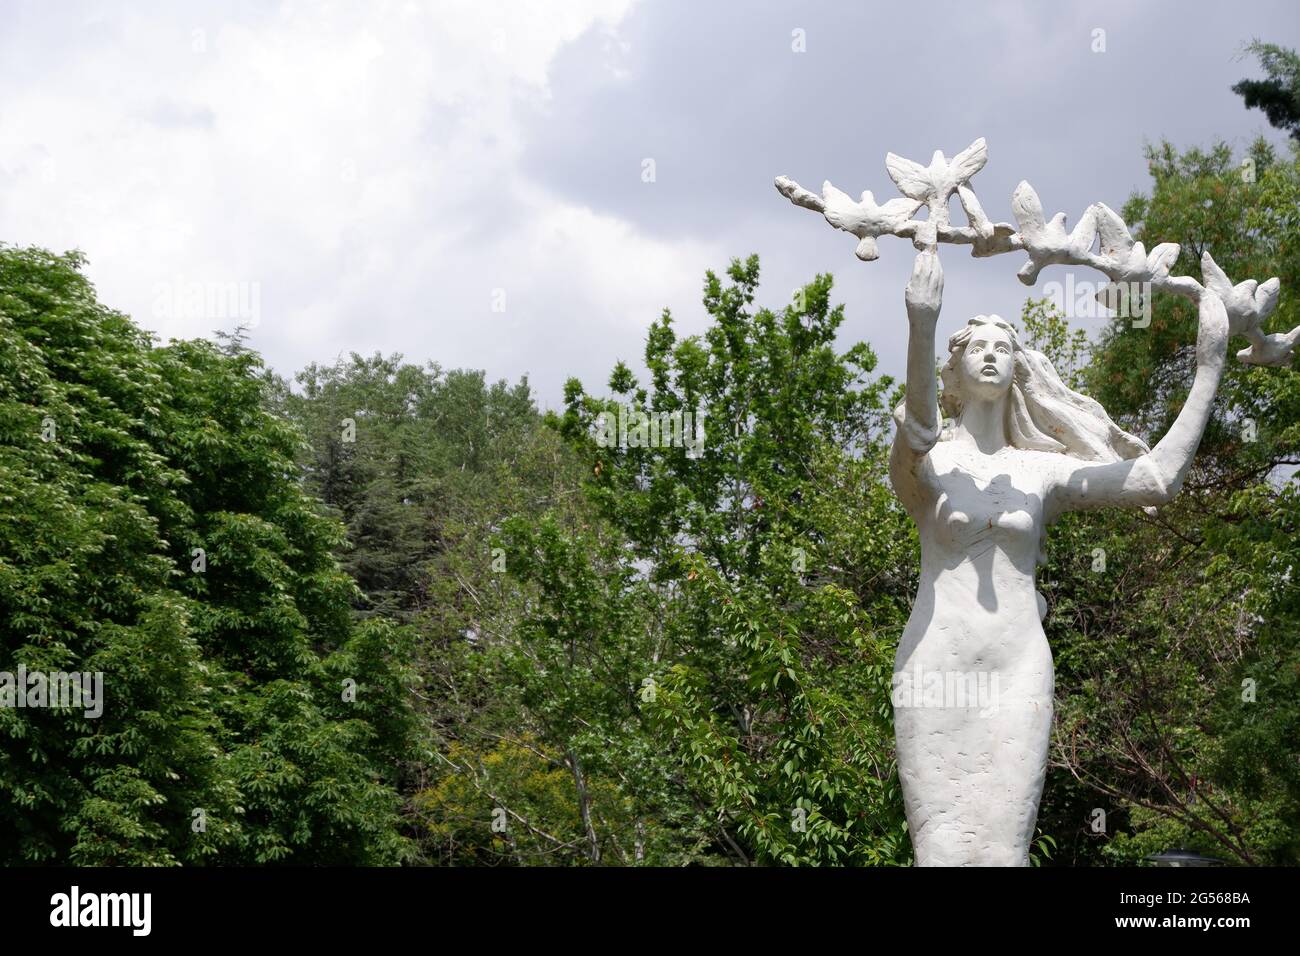 Statue of a young woman holding a branch with doves Stock Photo